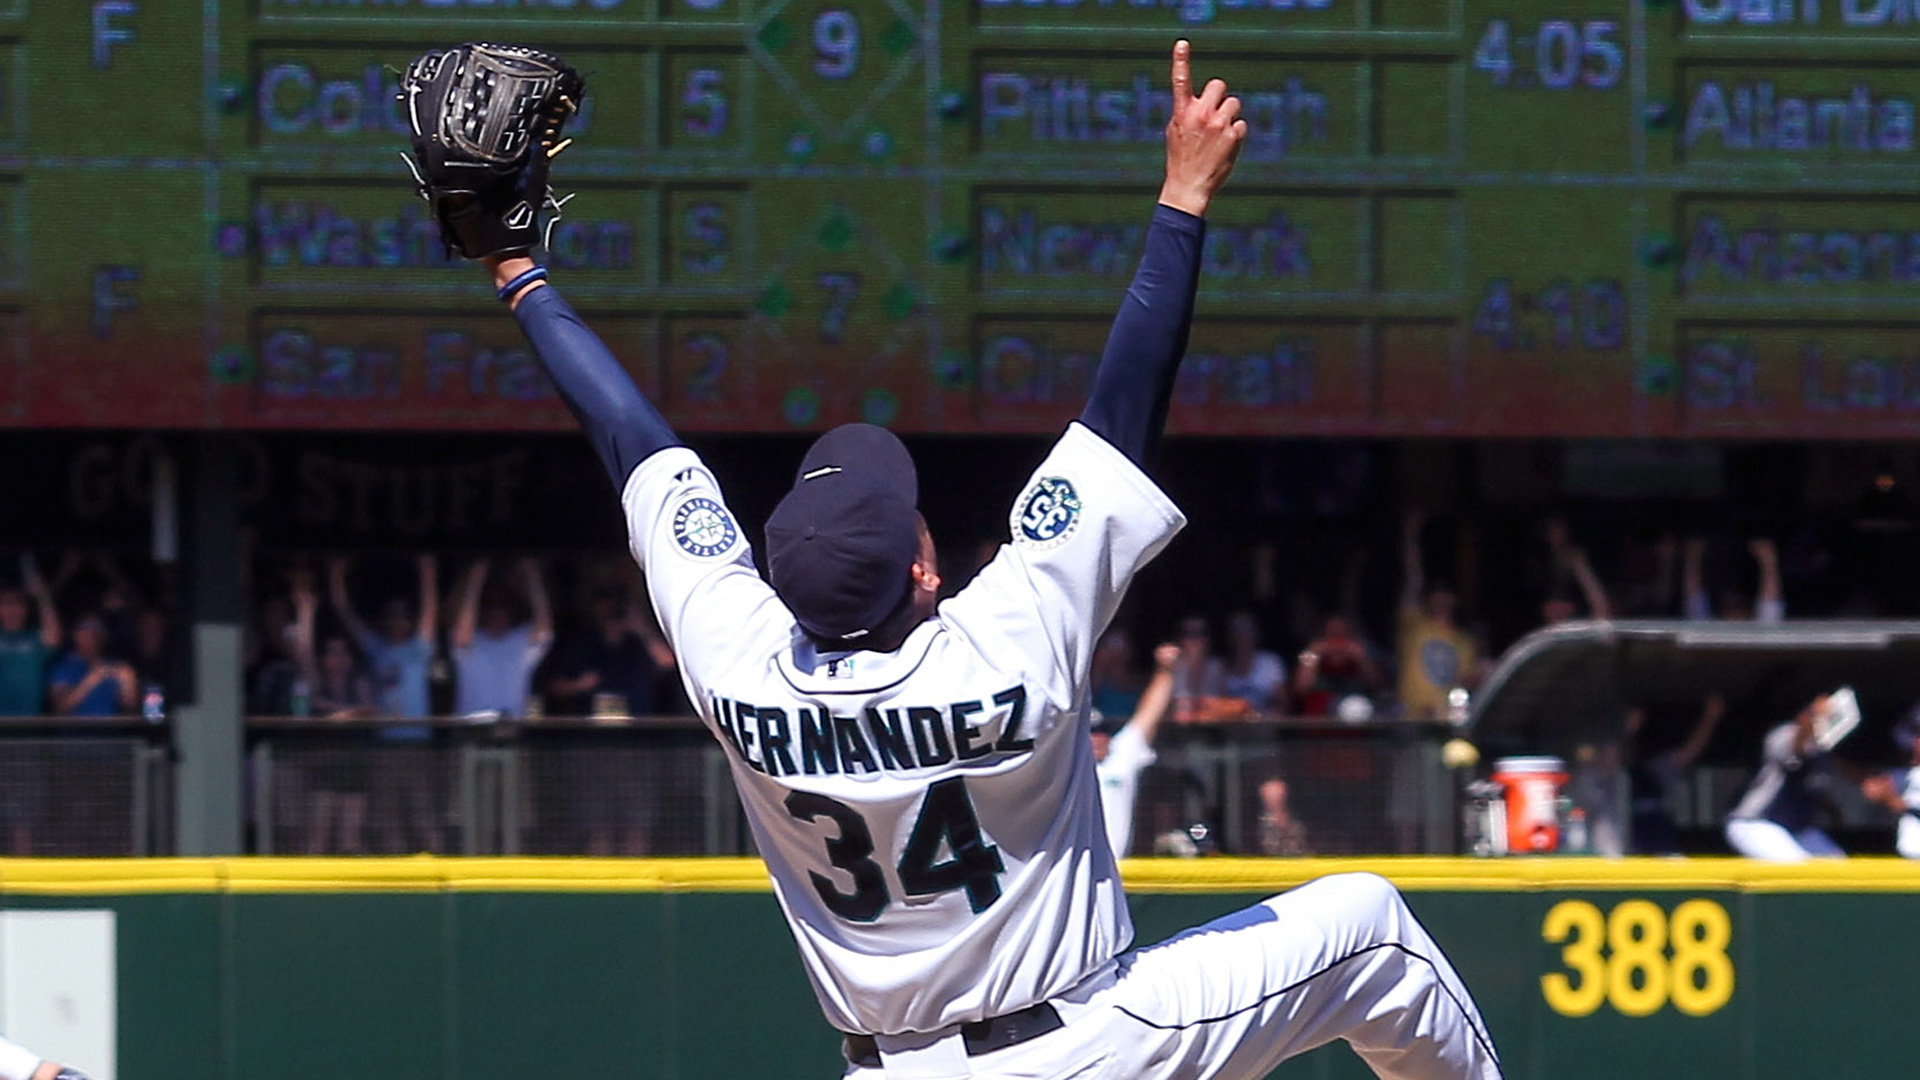 Felix Hernandez looks like a future Hall of Famer but it will be